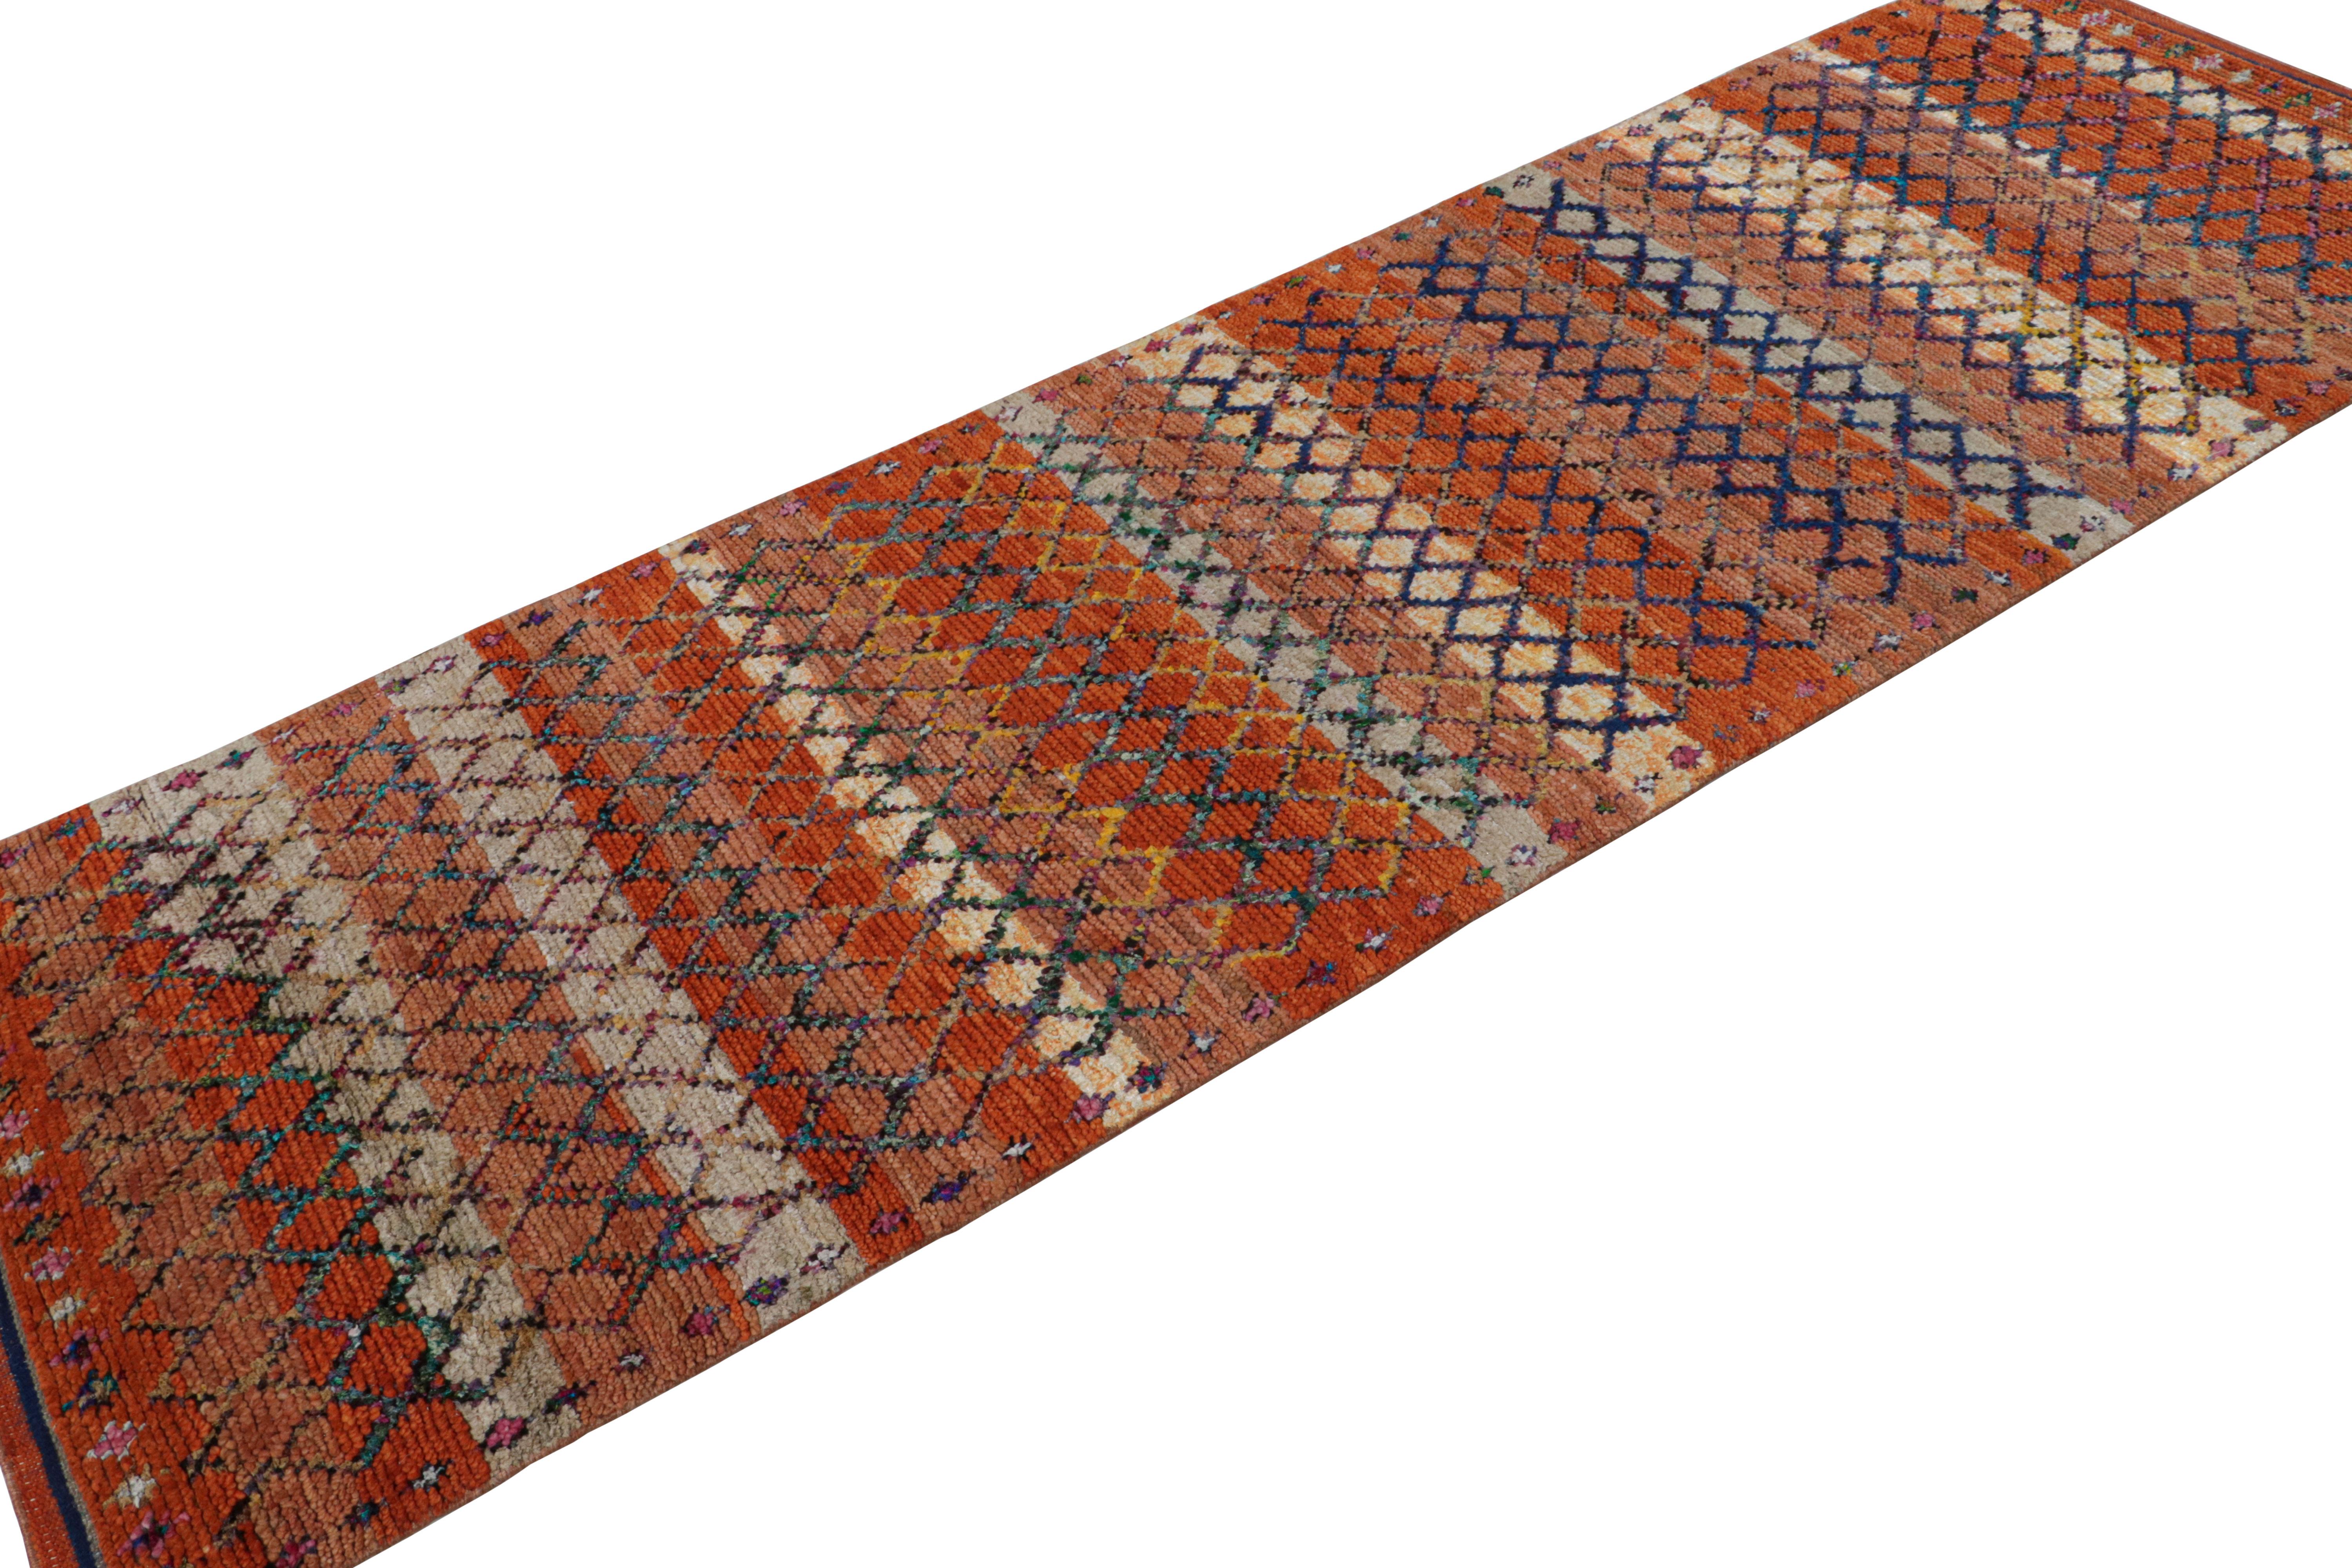 Hand-knotted in wool and silk, this 3x10 Moroccan runner features a ribbed texture and geometric patterns inspired by the primitivist Berber weaving traditions. 

On the Design: 

The runner carries a beloved look of Boucherouite fabric rugs.